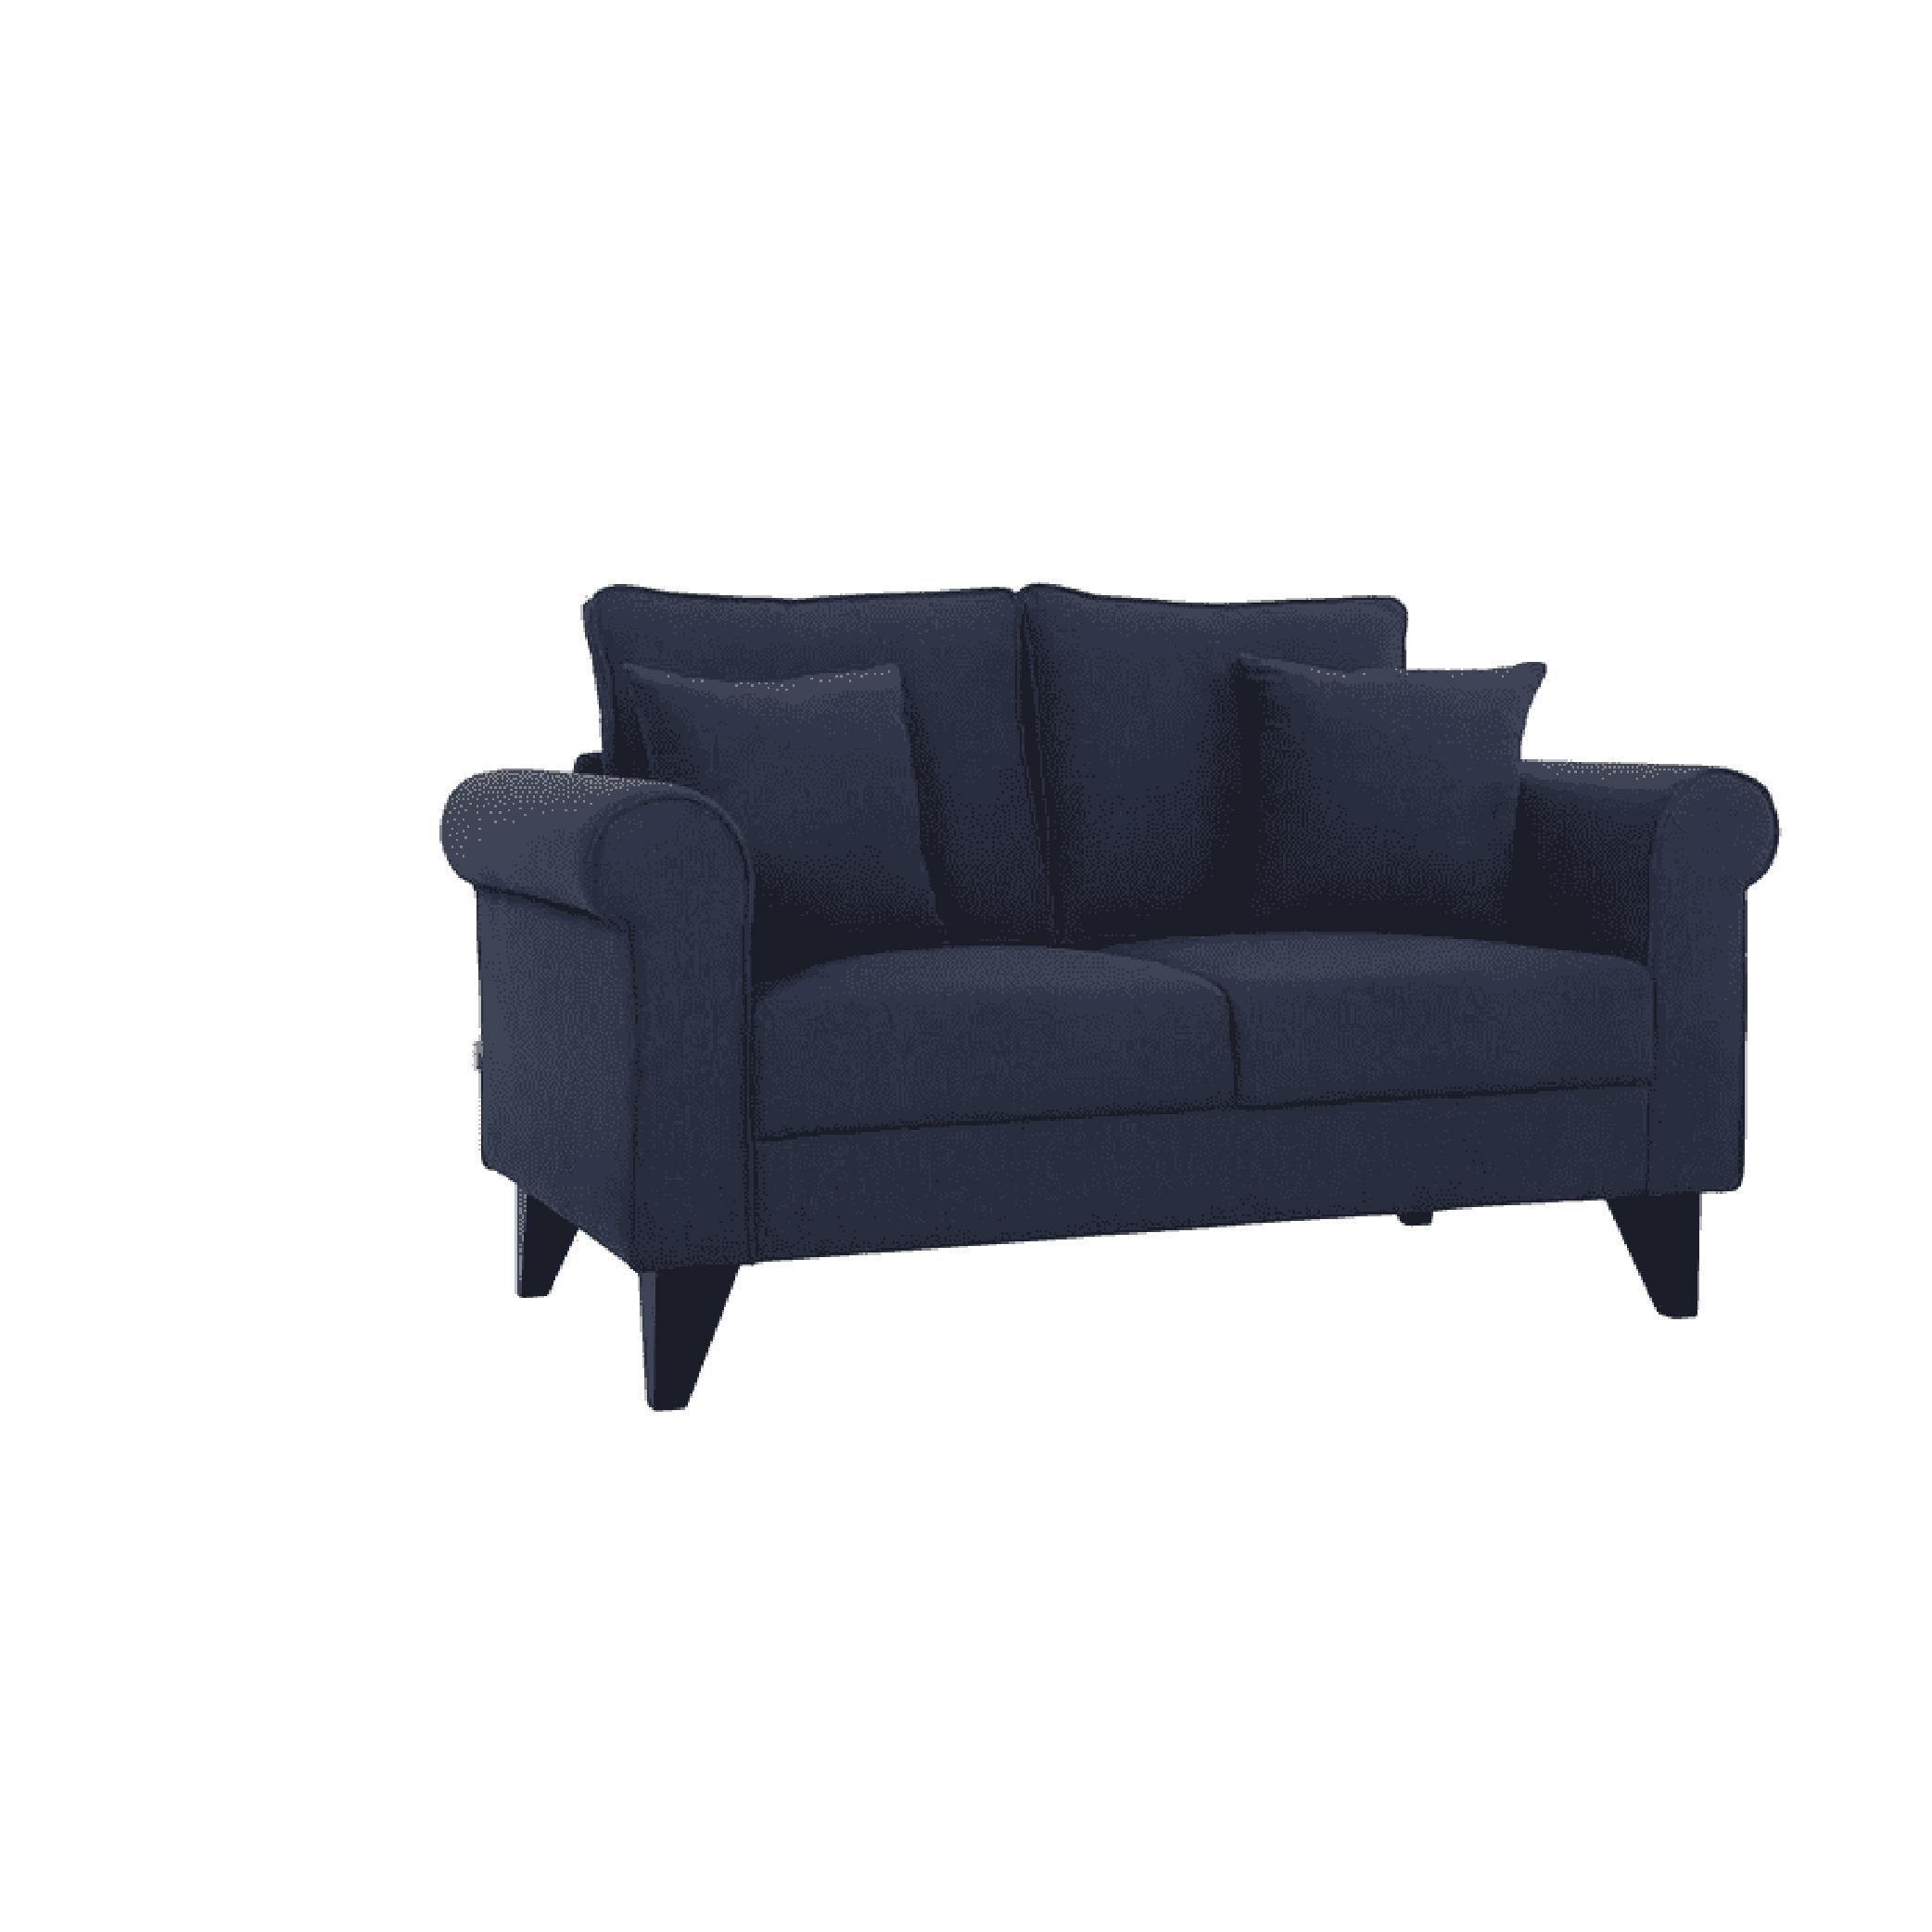 Sarno Two Seater Sofa in Navy Blue Colour